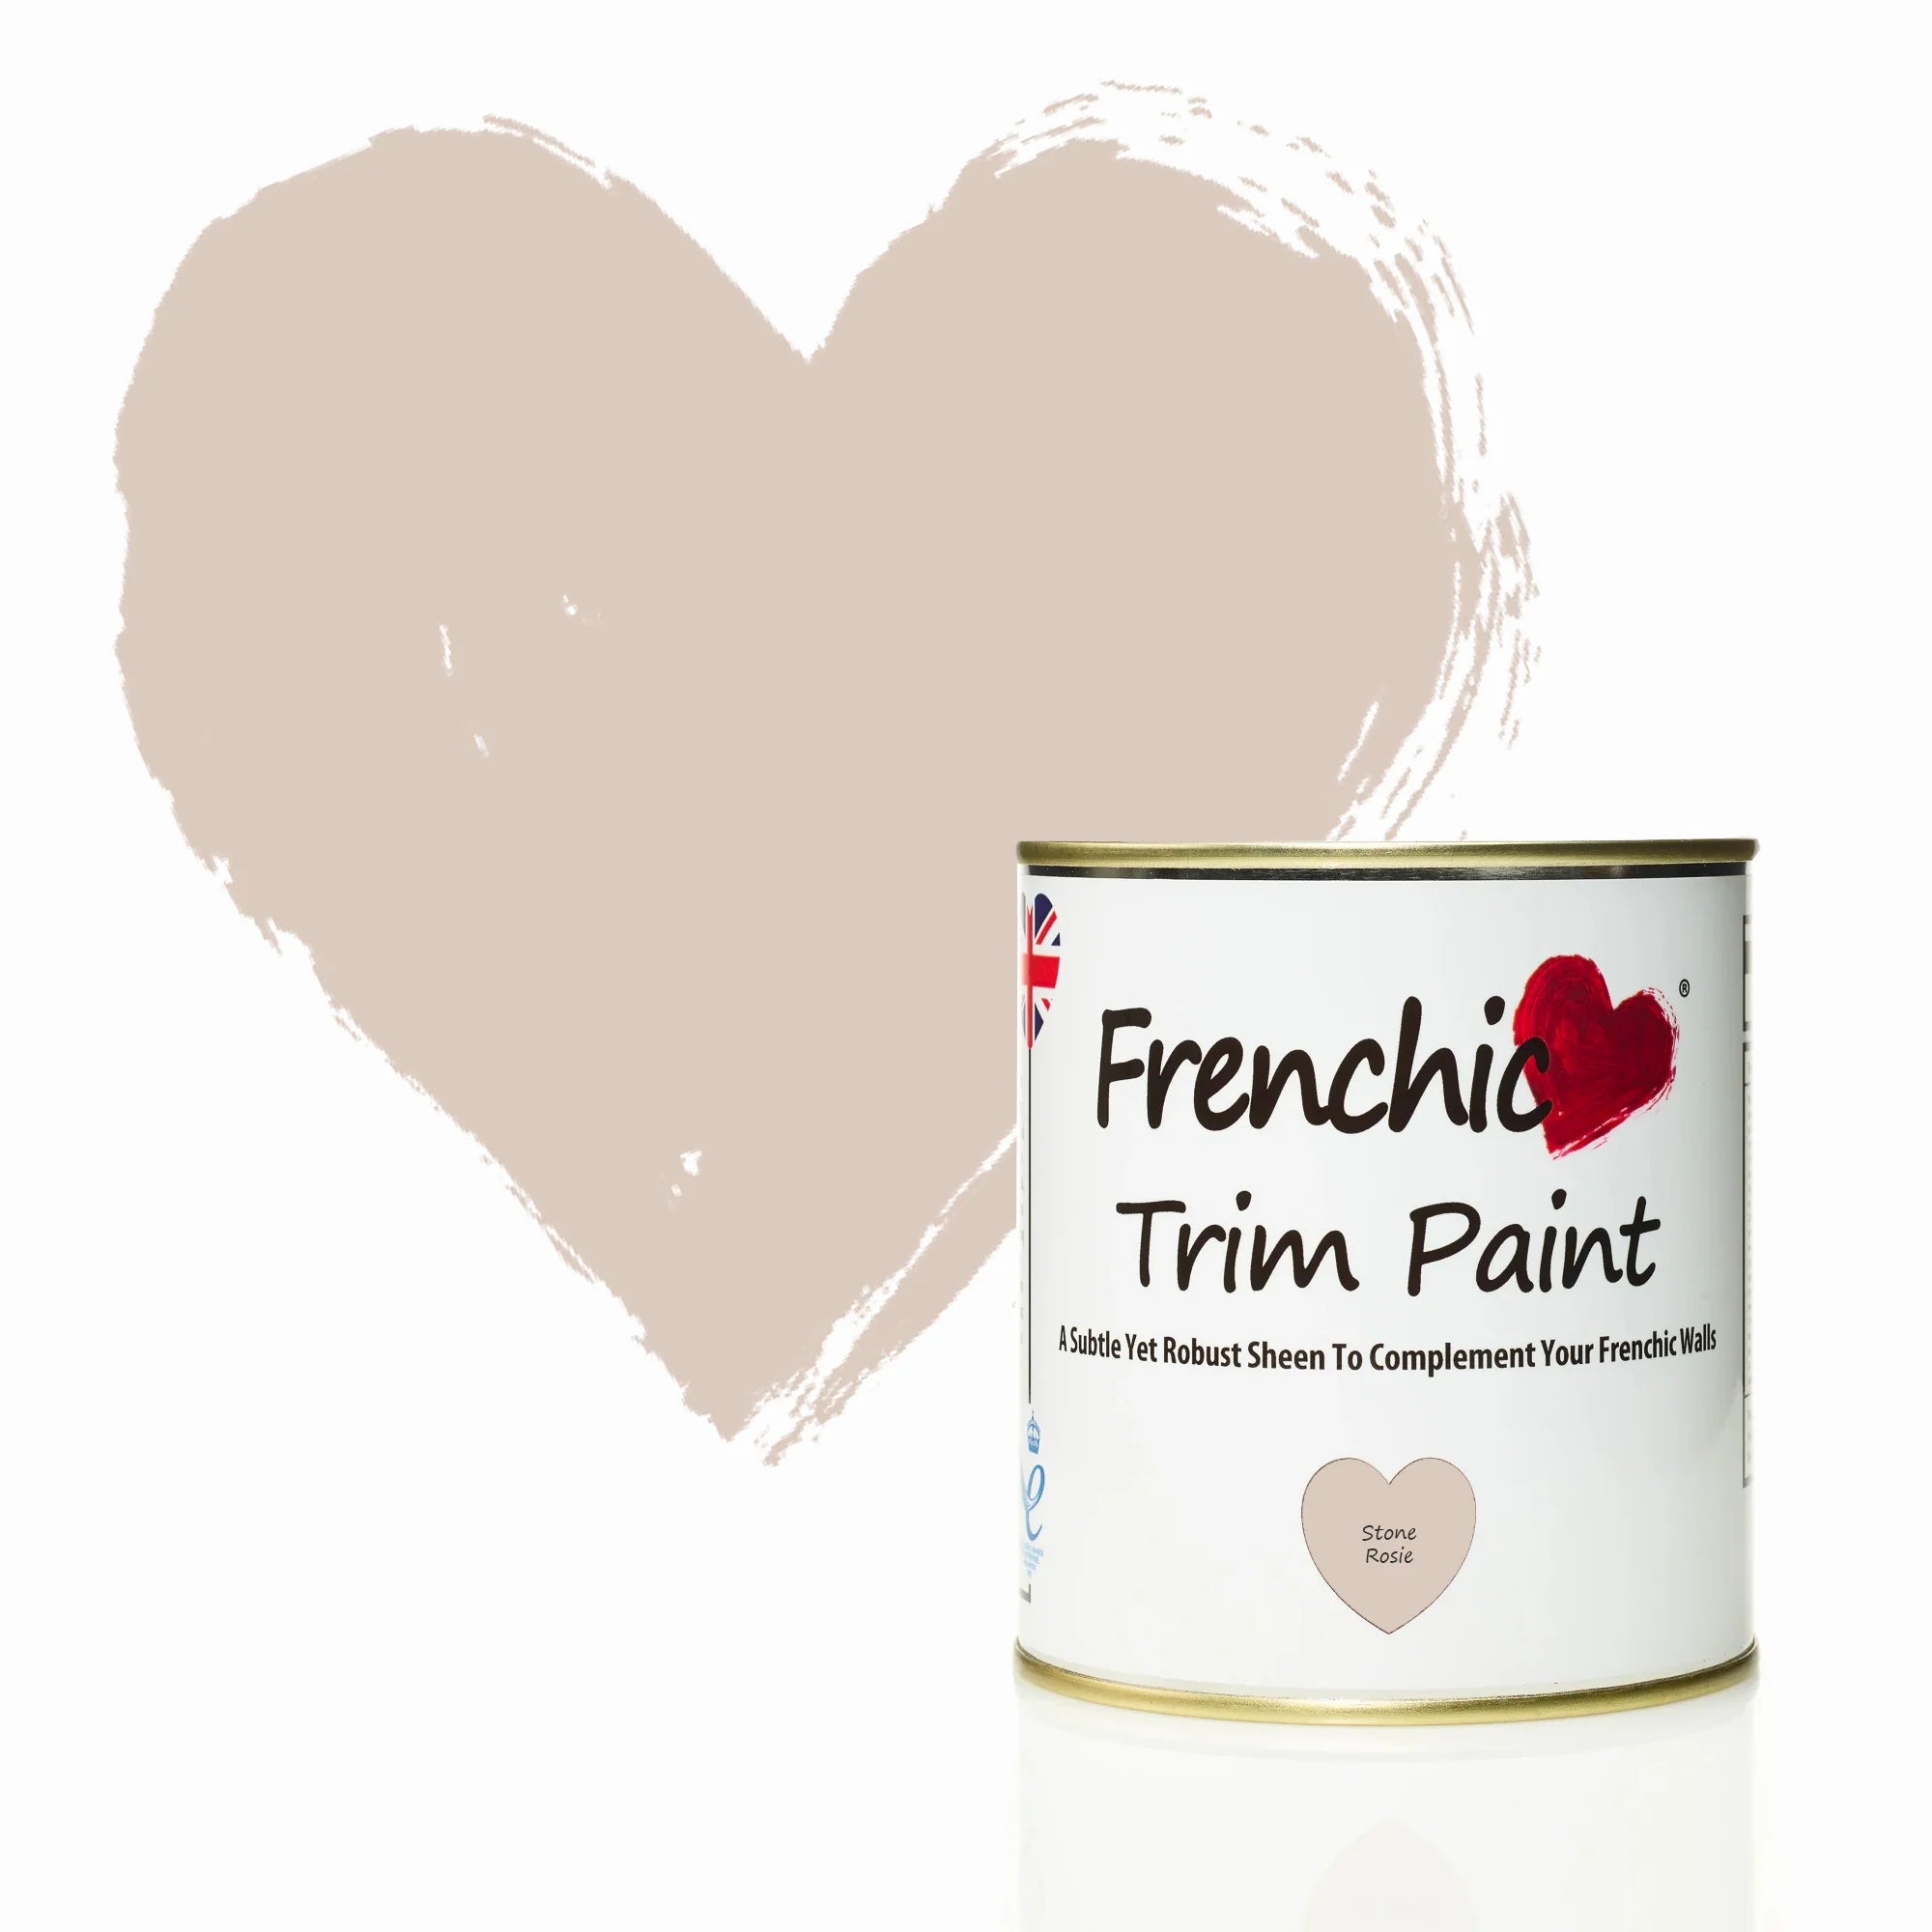 Frenchic Paint Stone Rosie Trim Paint Frenchic Paint Trim Paint Range by Weirs of Baggot Street Irelands Largest and most Trusted Stockist of Frenchic Paint. Shop online for Nationwide and Same Day Dublin Delivery